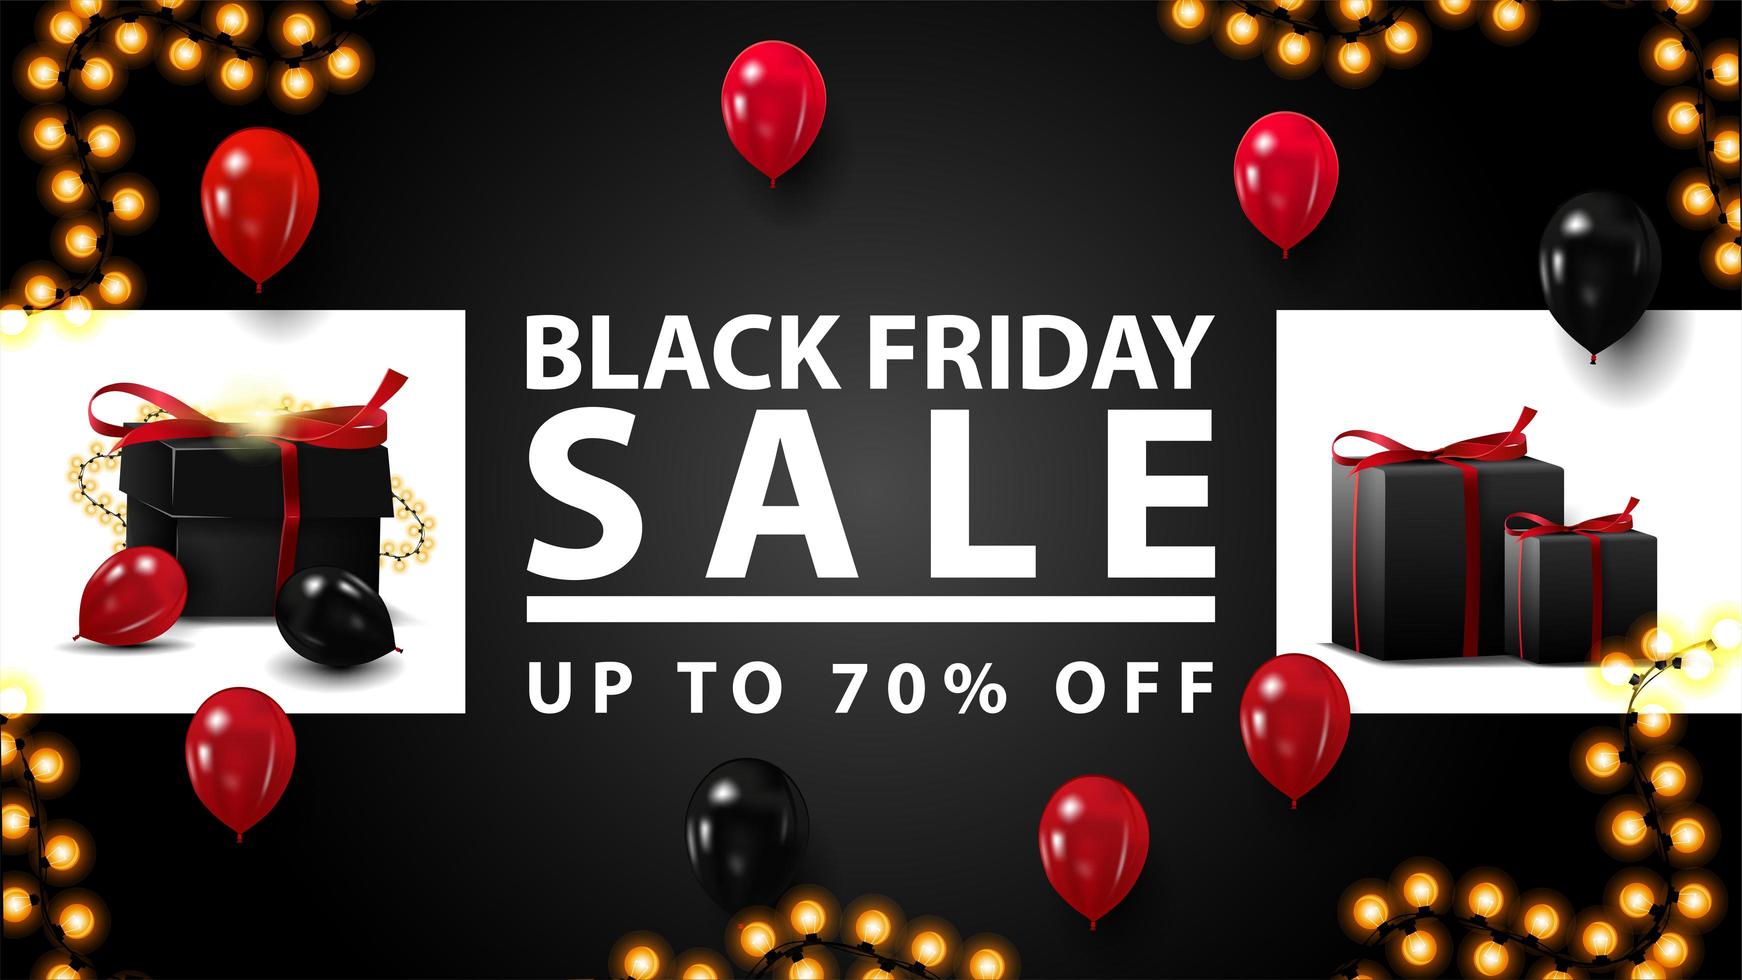 Black Friday Sale, up to 70 off banner vector